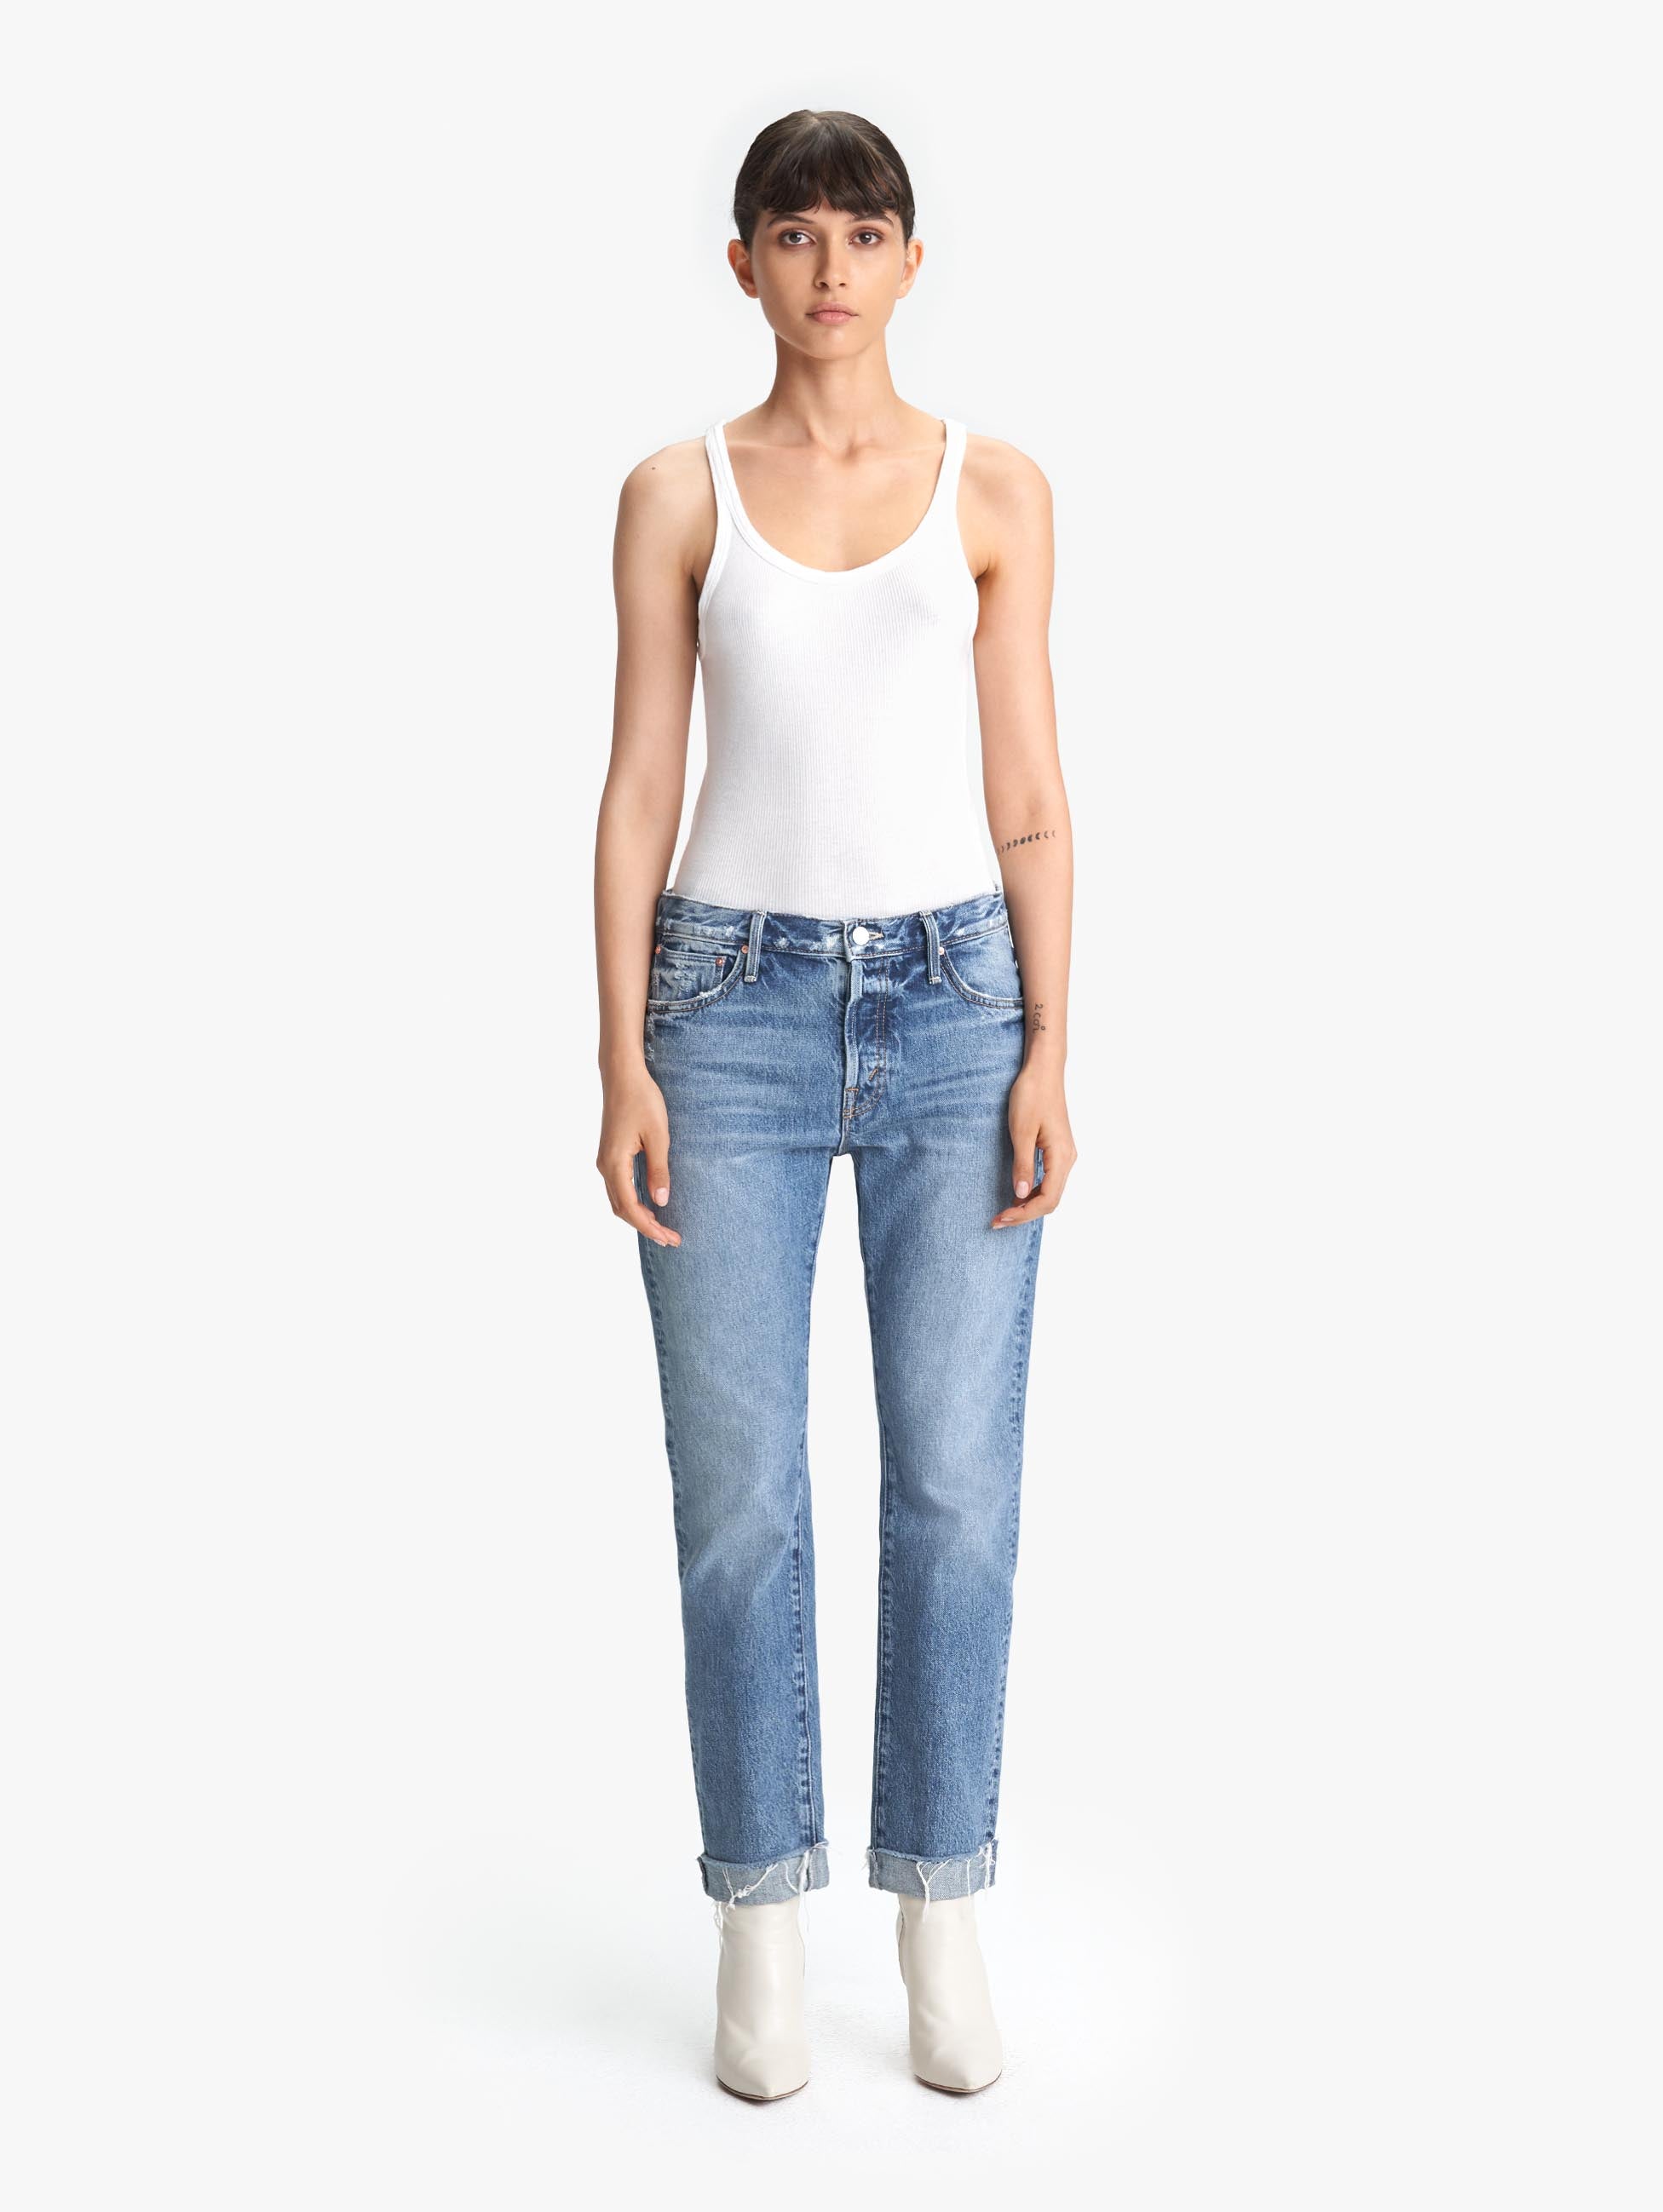 ankle fray jeans